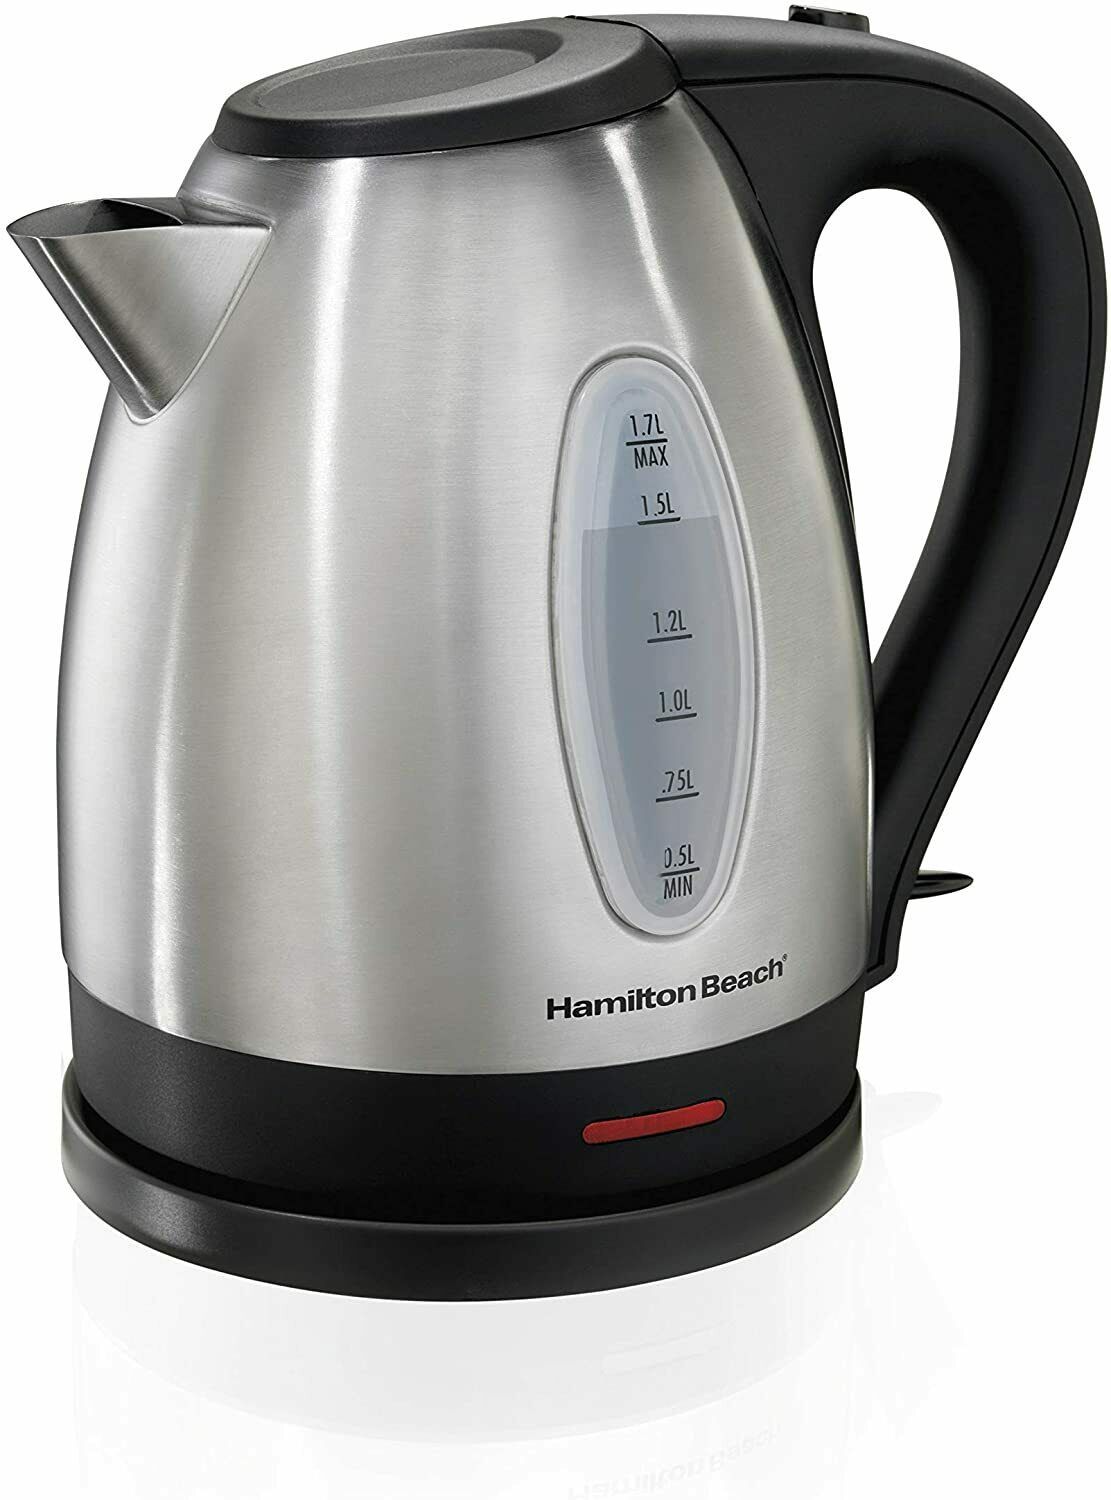 Primary image for Hamilton Beach 40880 1.7L Electric Kettle - Silver